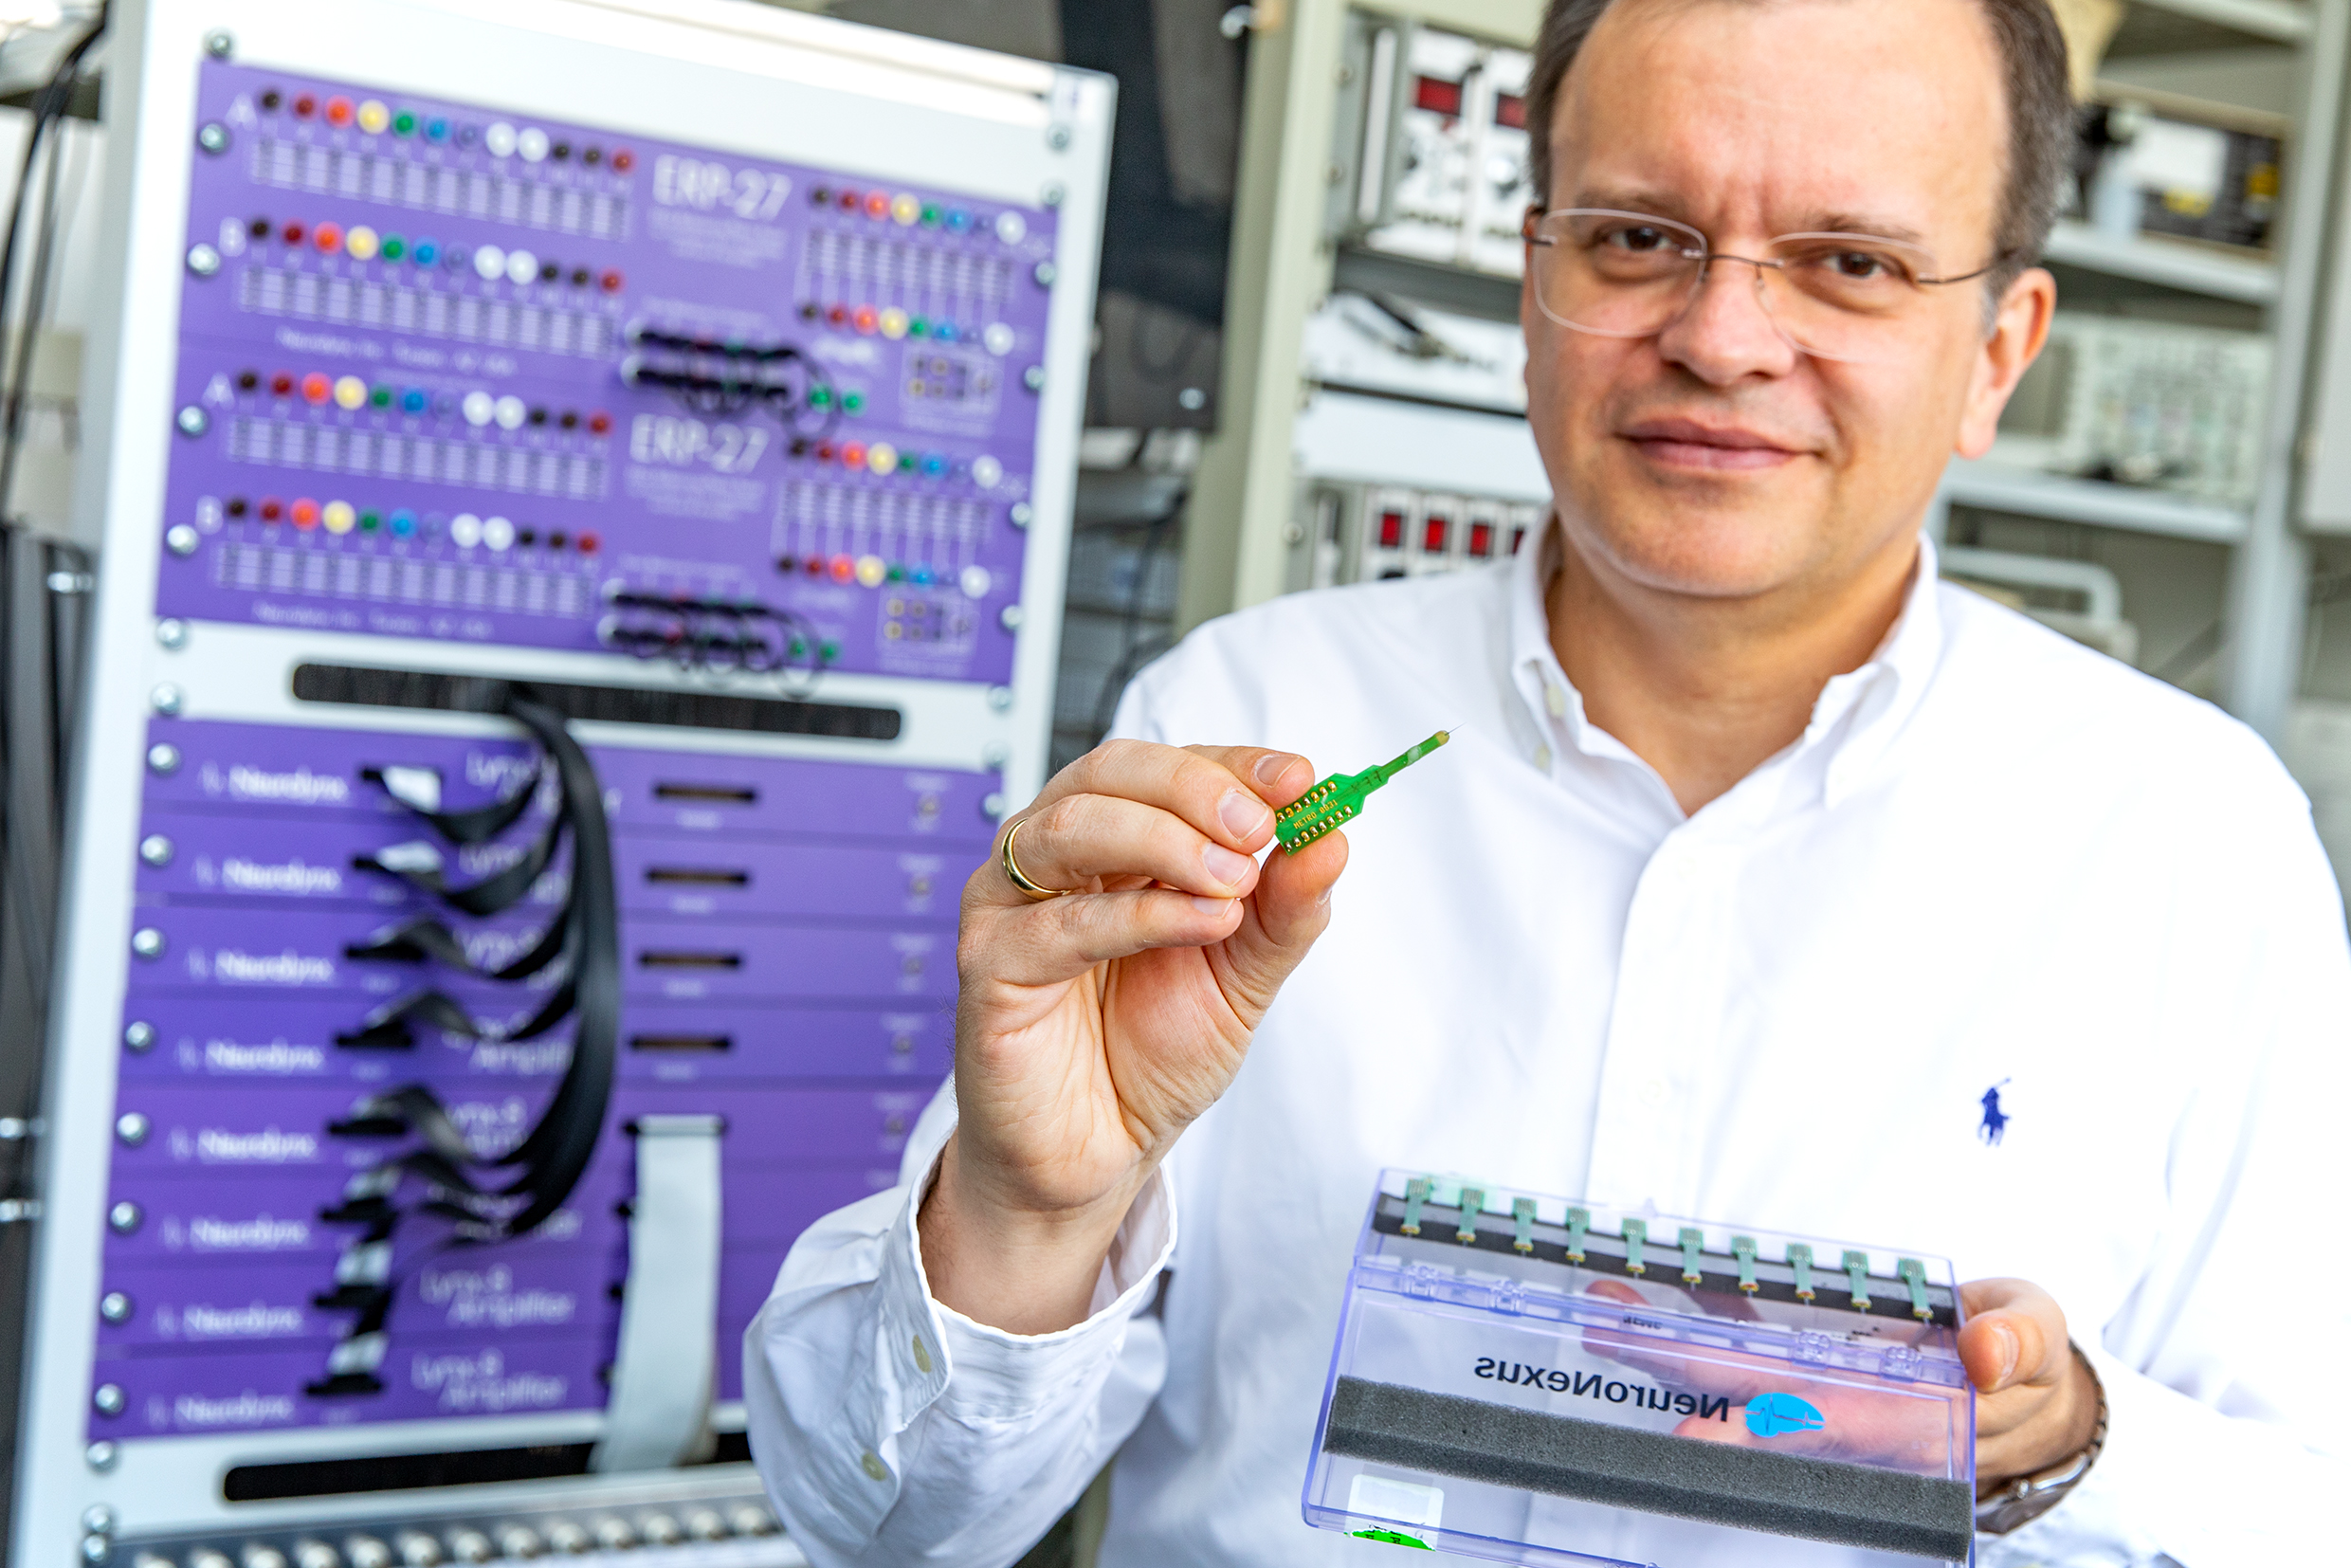 Professor Dr. Andrej Kral stands with a multi-electrode array in his hand in front of an amplifier for brain wave measurement.